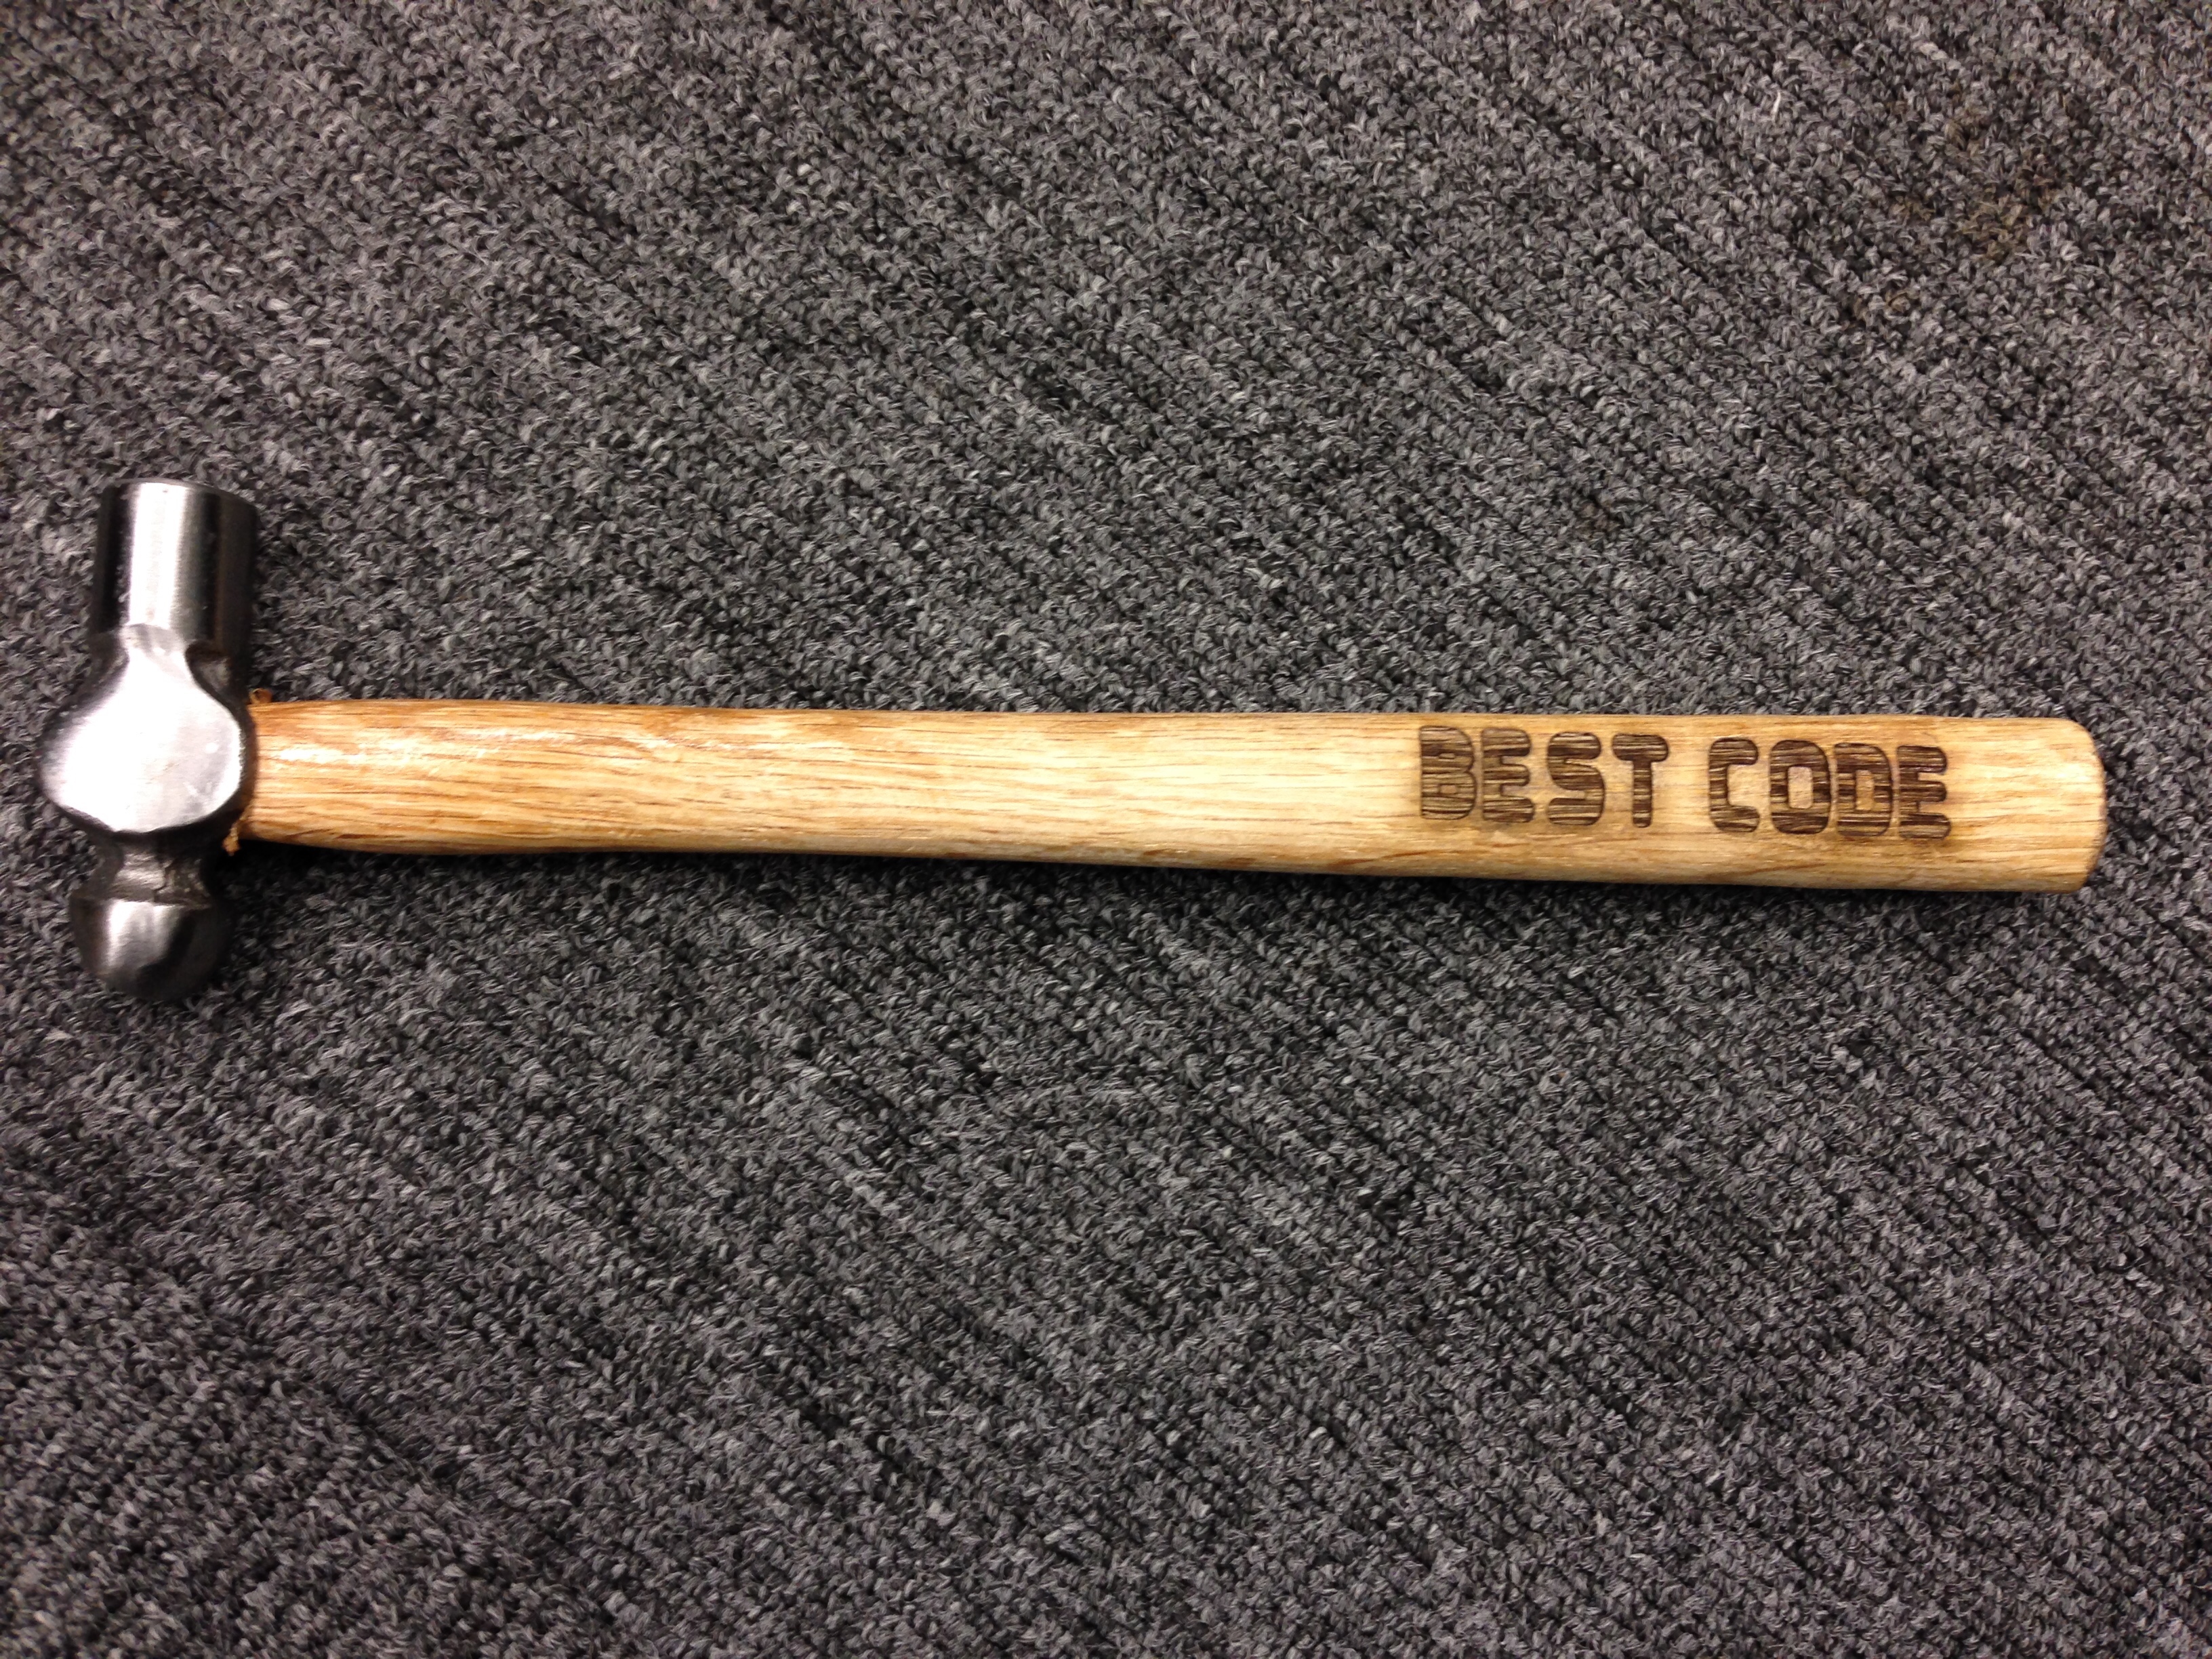 'Best Code' hammer, one of the three HAMR trophies.